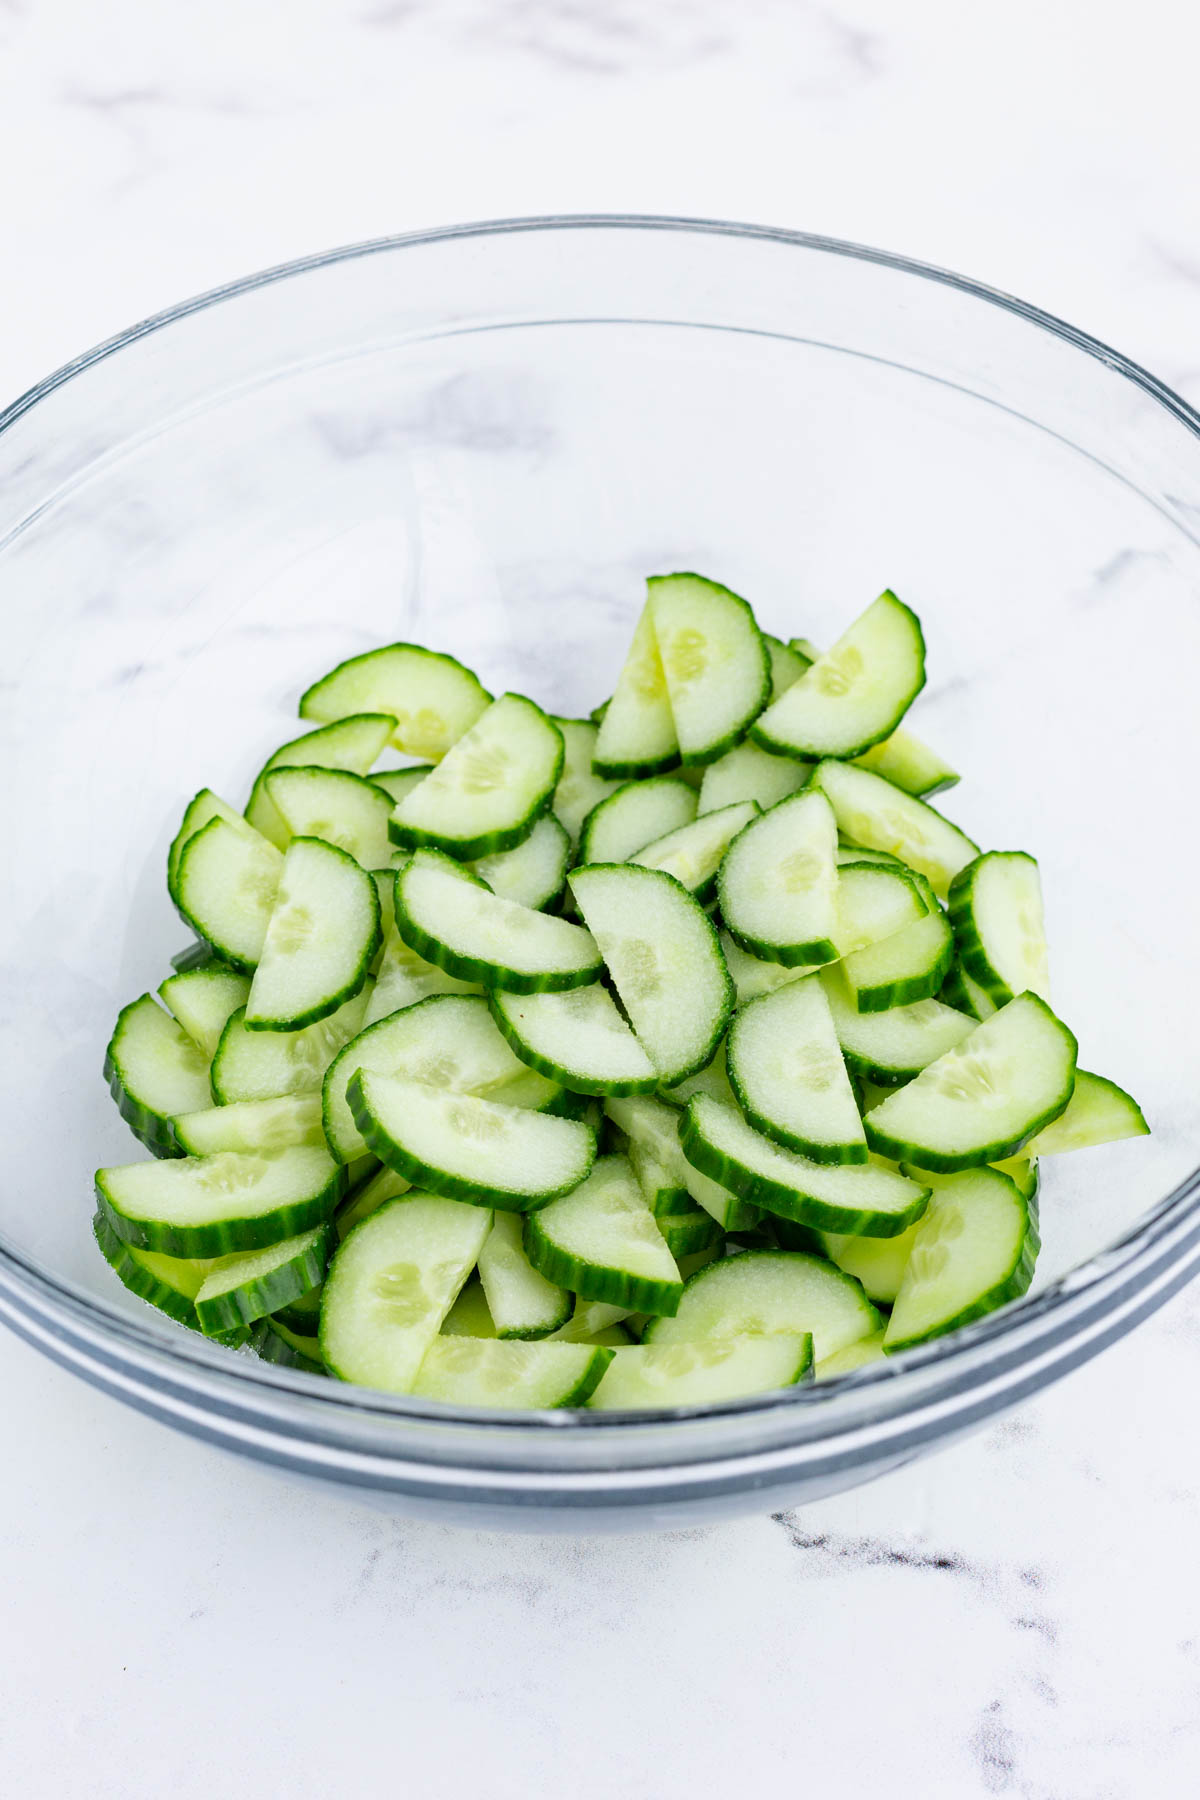 Salt is drizzled on sliced cucumbers in a bowl.